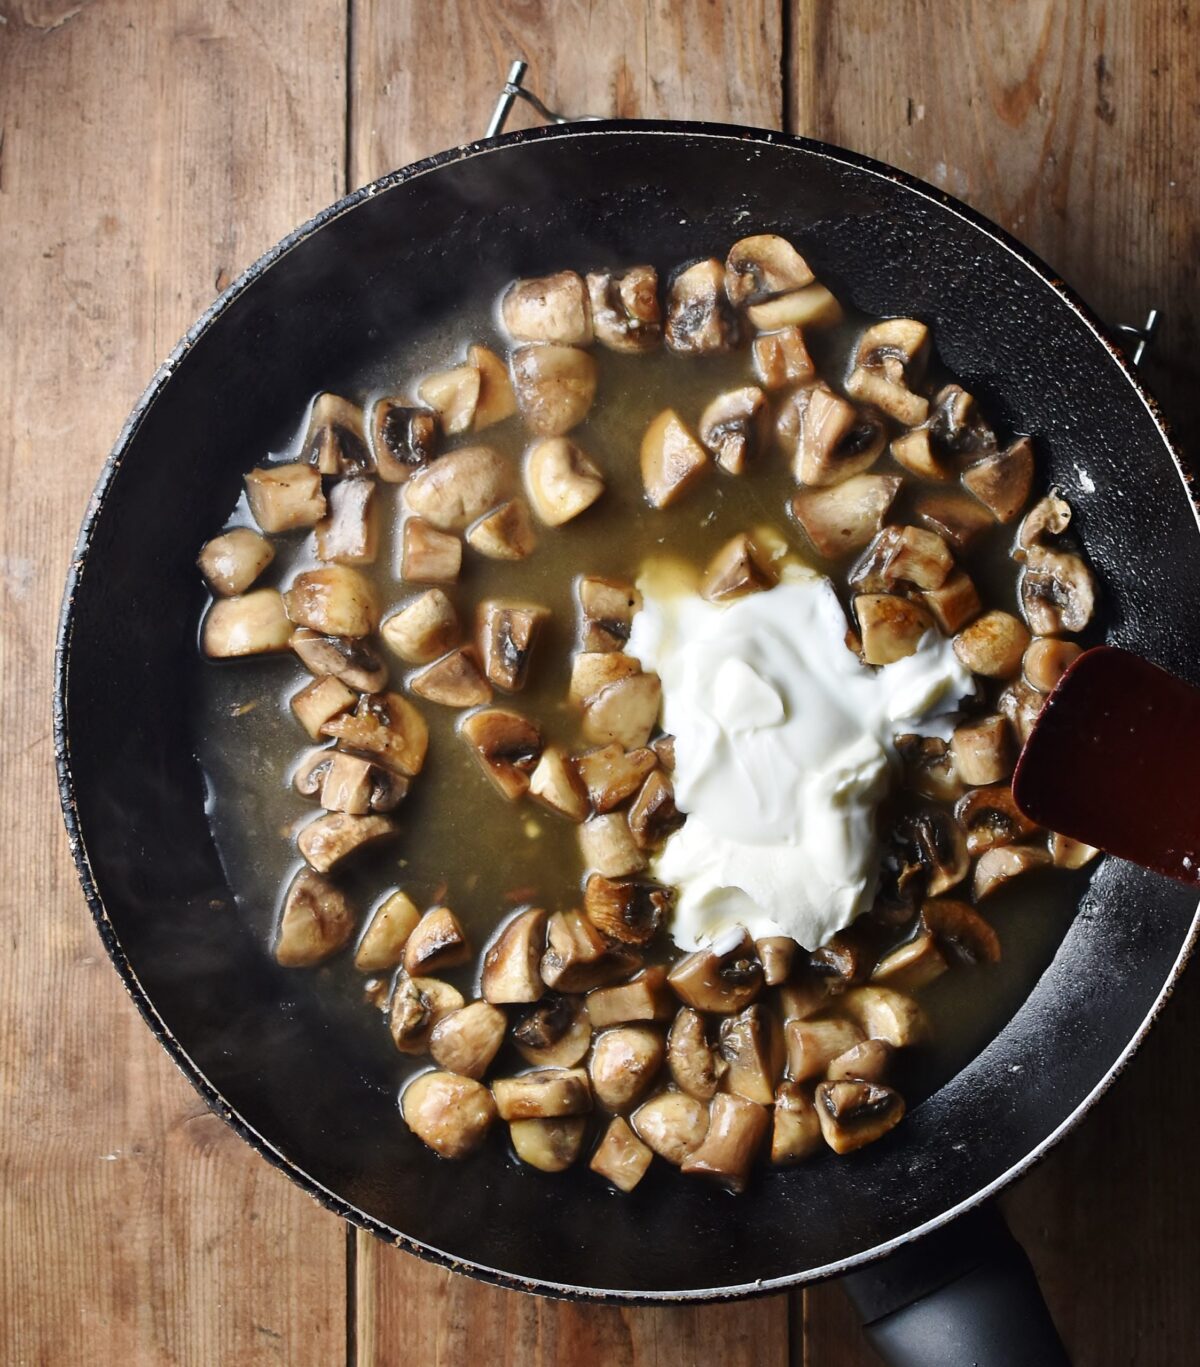 Chopped mushrooms with sauce and dollop of fromage frais in large pan.